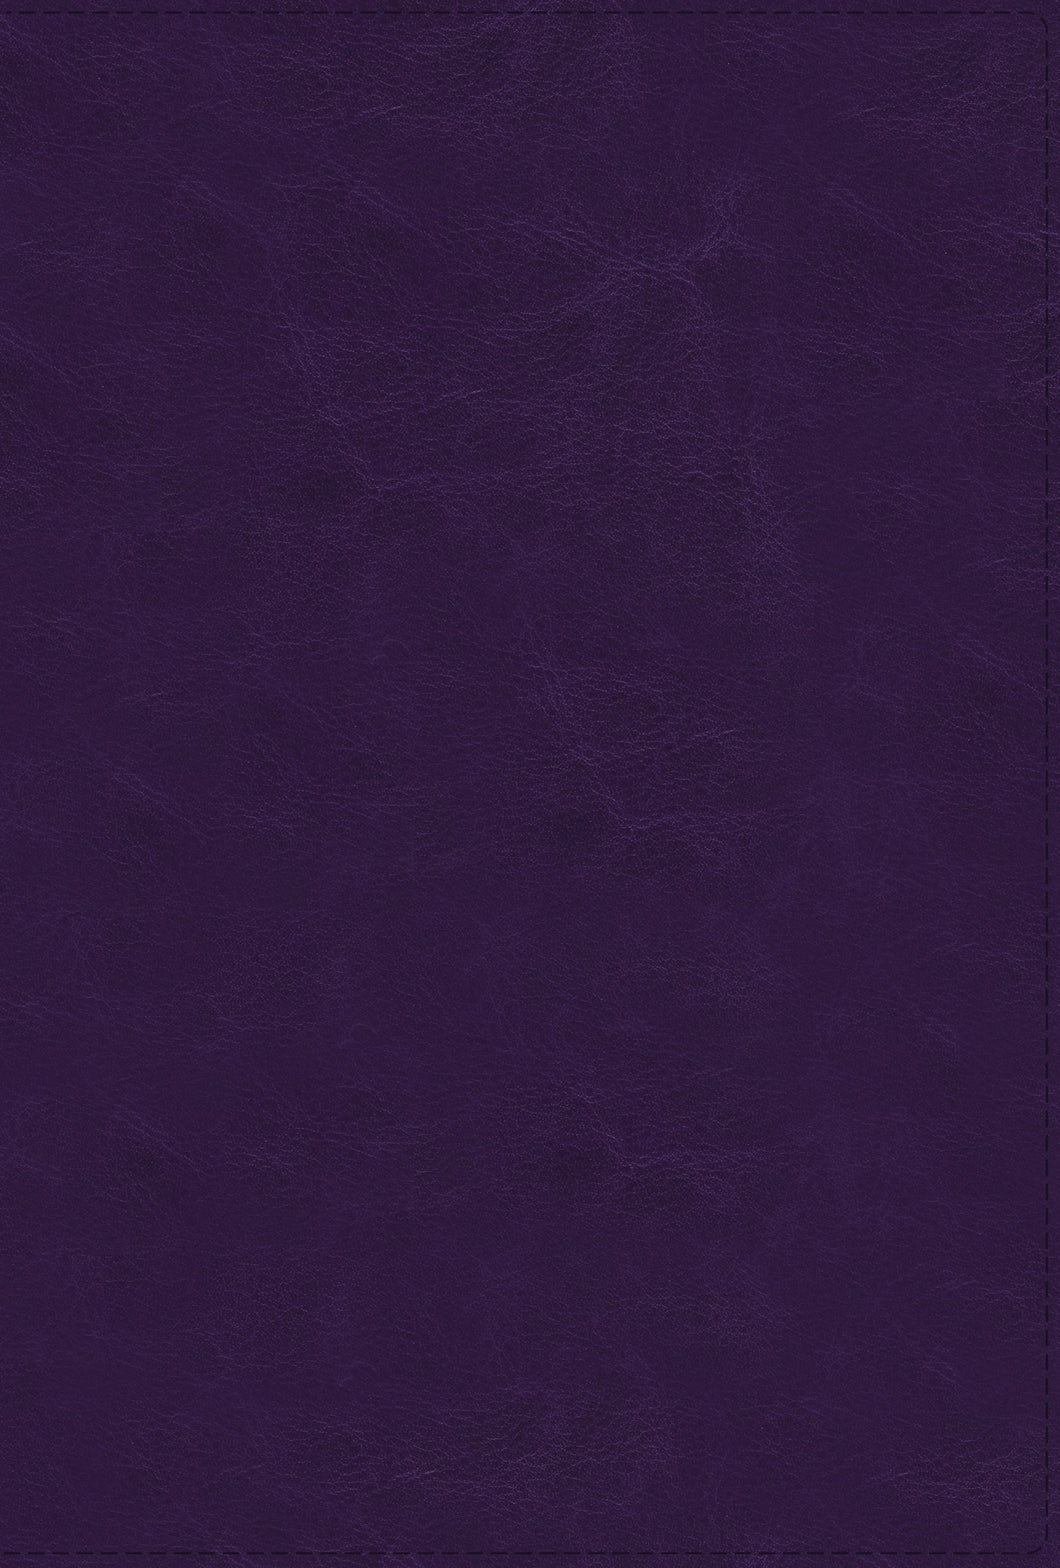 Spanish-RVR 1977 Thompson Chain Reference Bible (Biblia de Referencia Thompson)-Purple Leathersoft Indexed with Zipper